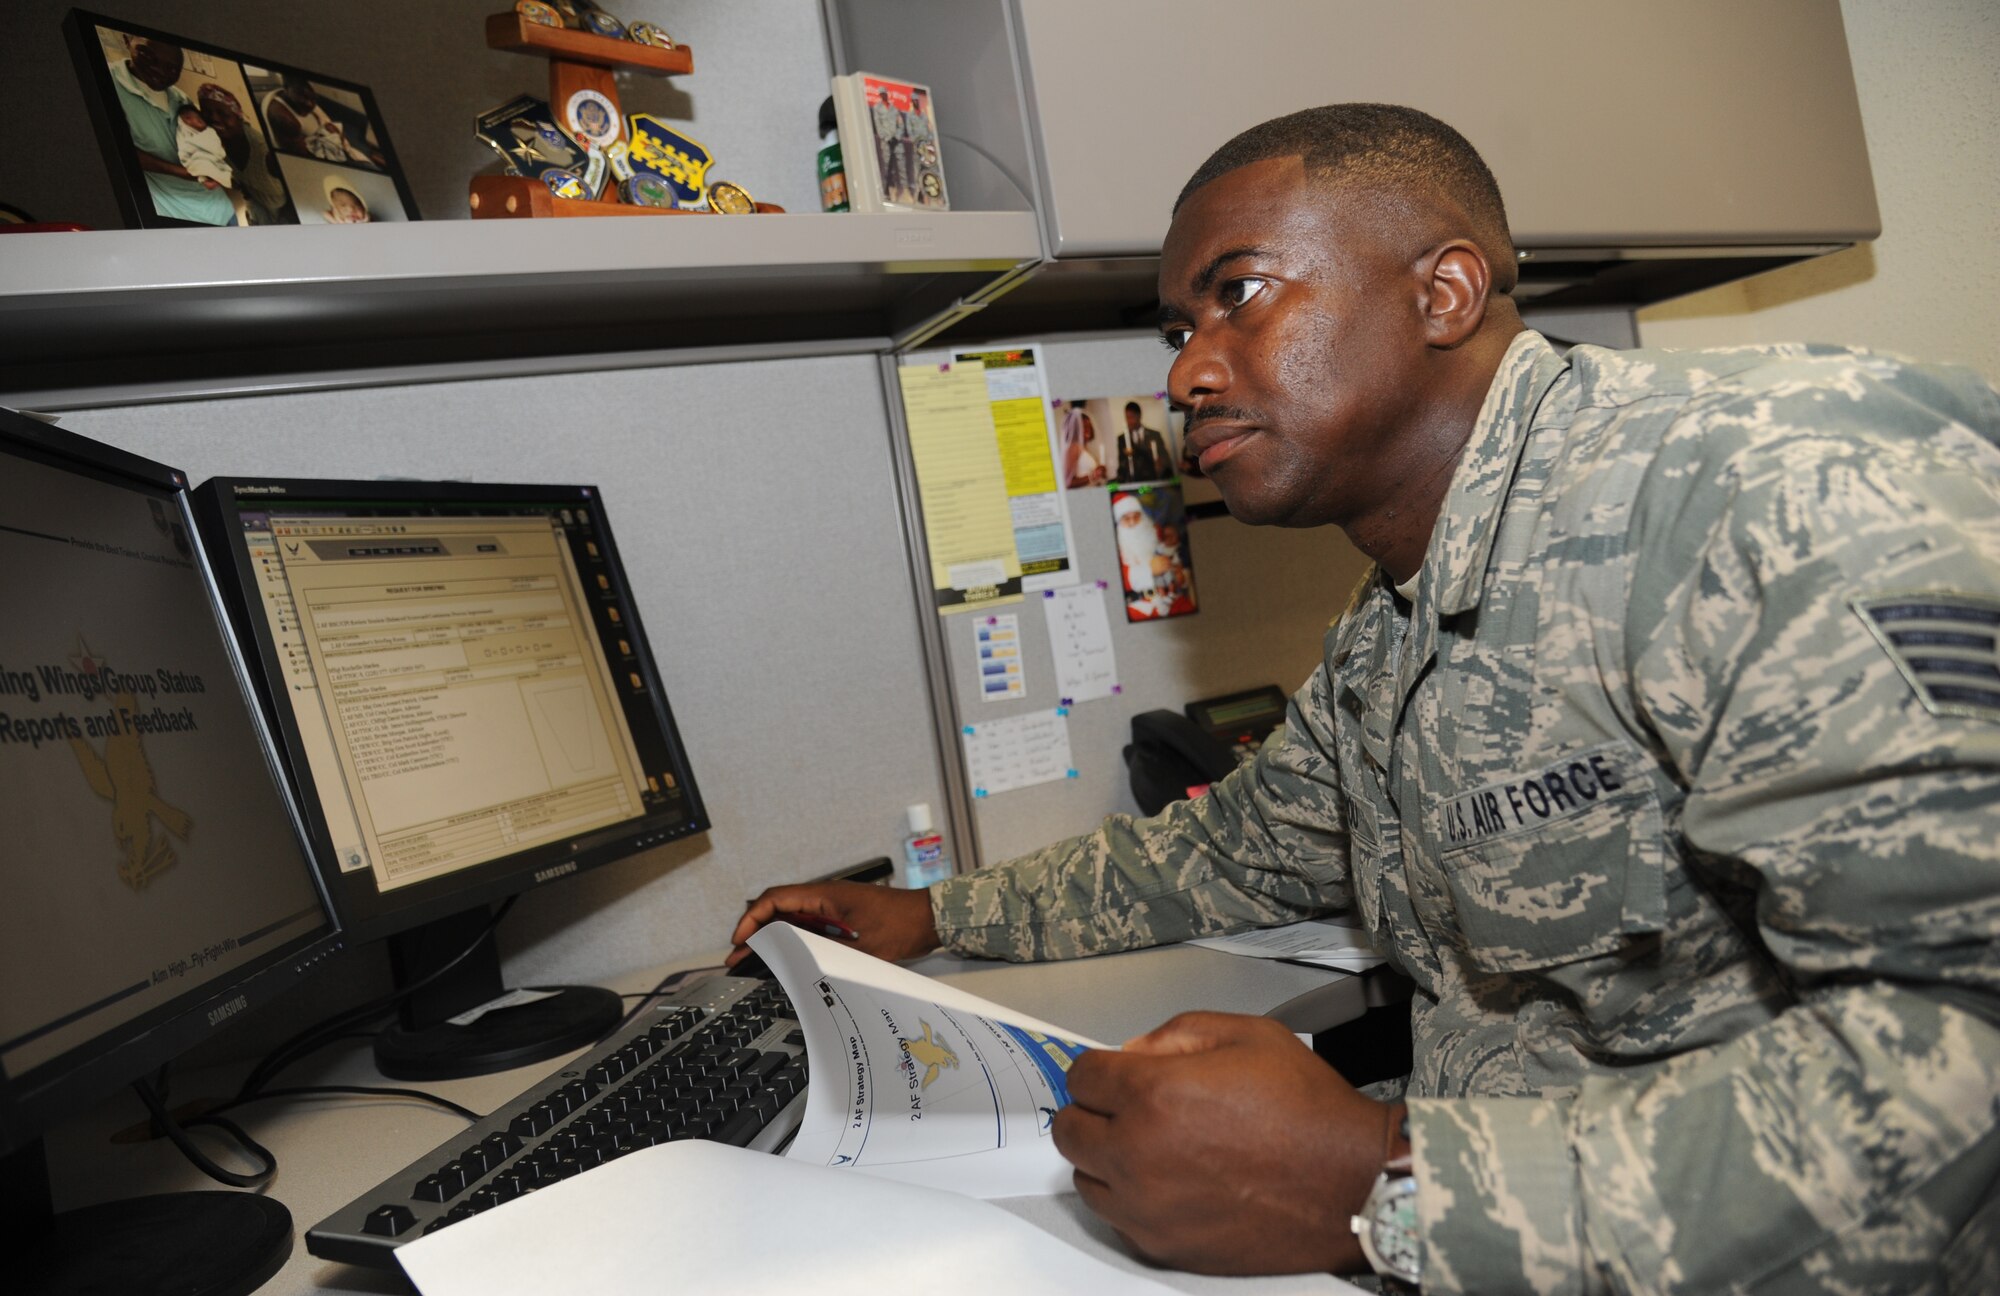 Staff Sgt. Joseph Boyou, 2nd Air Force, reviews slides for a final review session for 2nd AF, 81st Training Wing and the 81st Training Group July 1, 2014, at Keesler Air Force Base, Miss.  Boyou was born in Liberia, West Africa and escaped the civil war there when he was a child. Boyou wrote a memoir telling his story of overcoming adversity. It is scheduled to be released later this summer. (U.S. Air Force photo by Kemberly Groue)